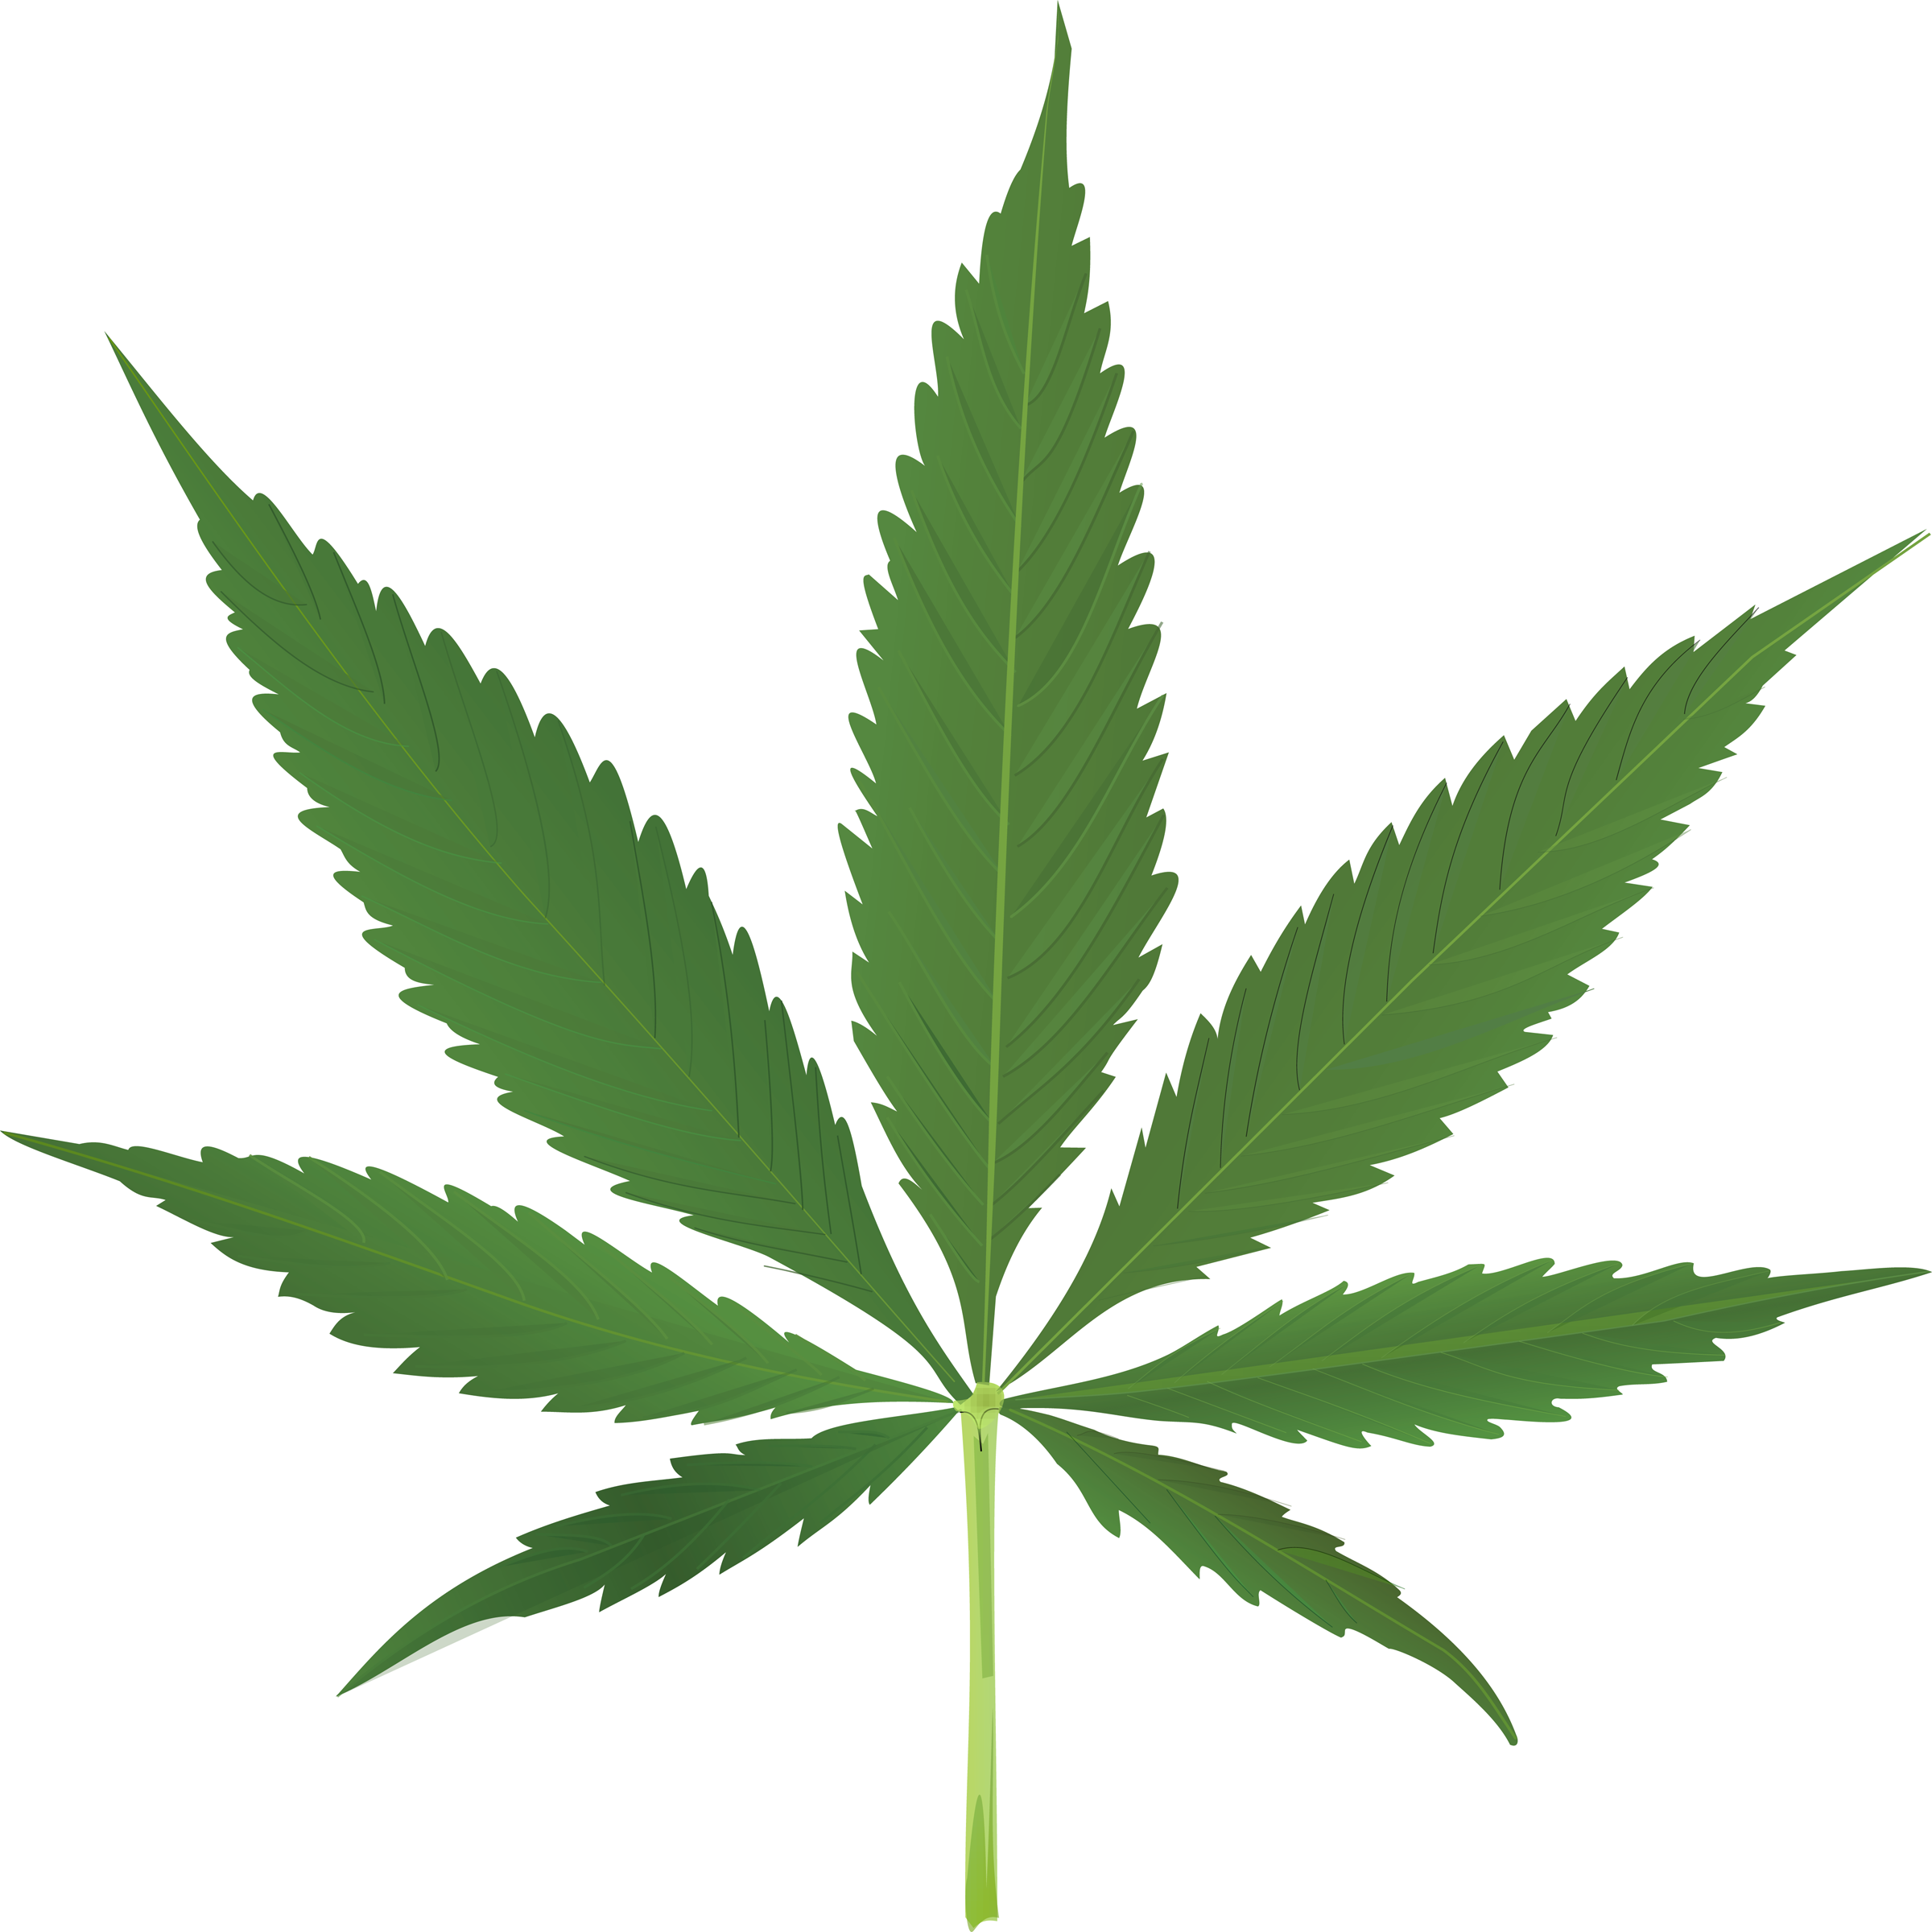 Weed Leaf   Clipart Panda   Free Clipart Images